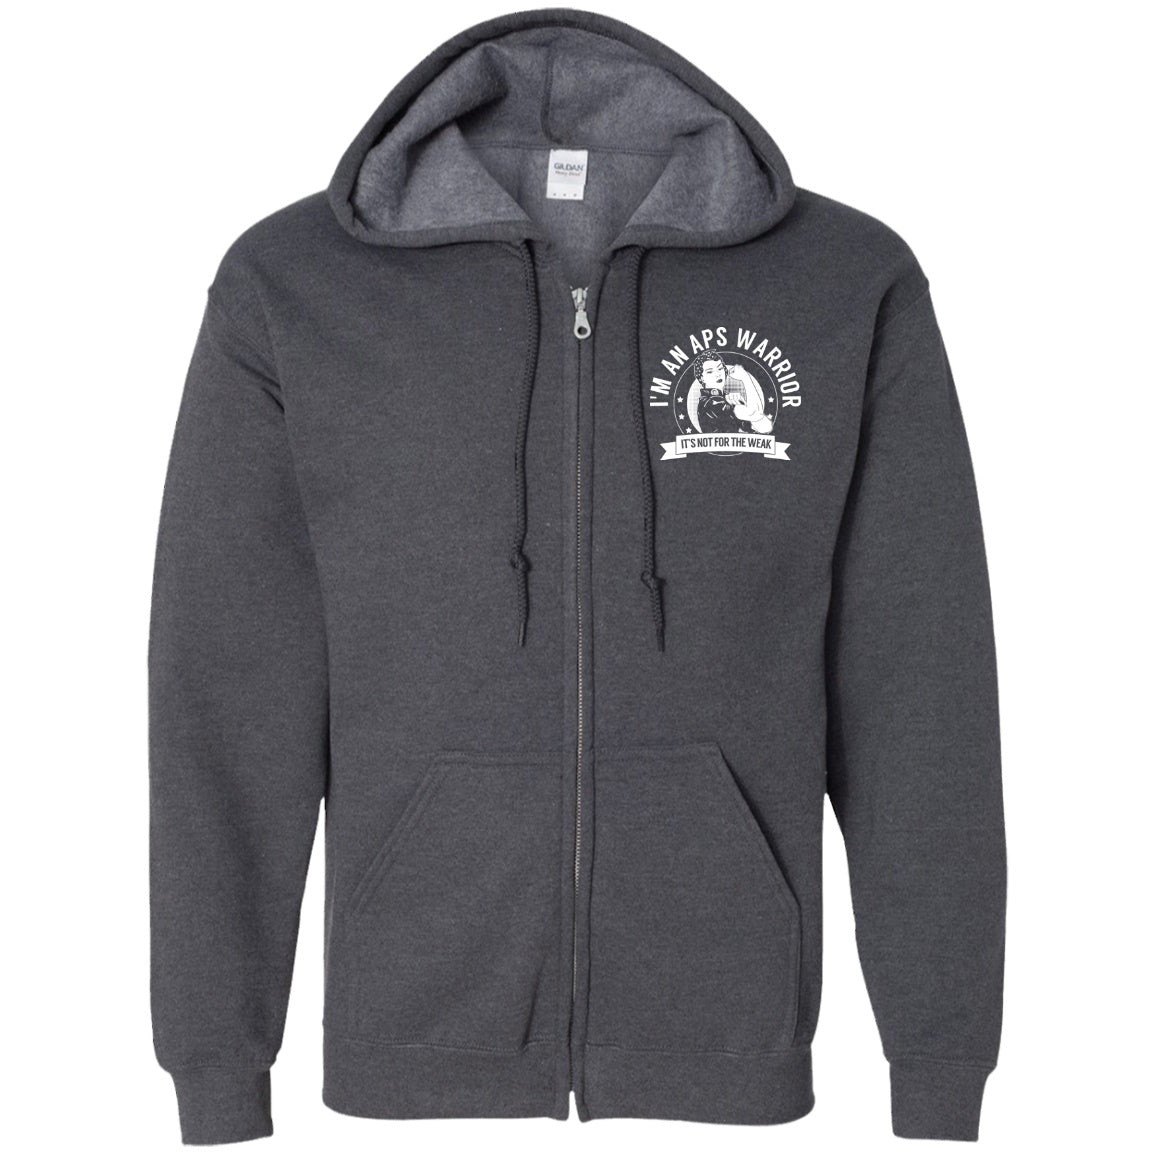 Antiphospholipid Antibody Syndrome - APS Warrior NFTW Zip Up Hooded Sweatshirt - The Unchargeables